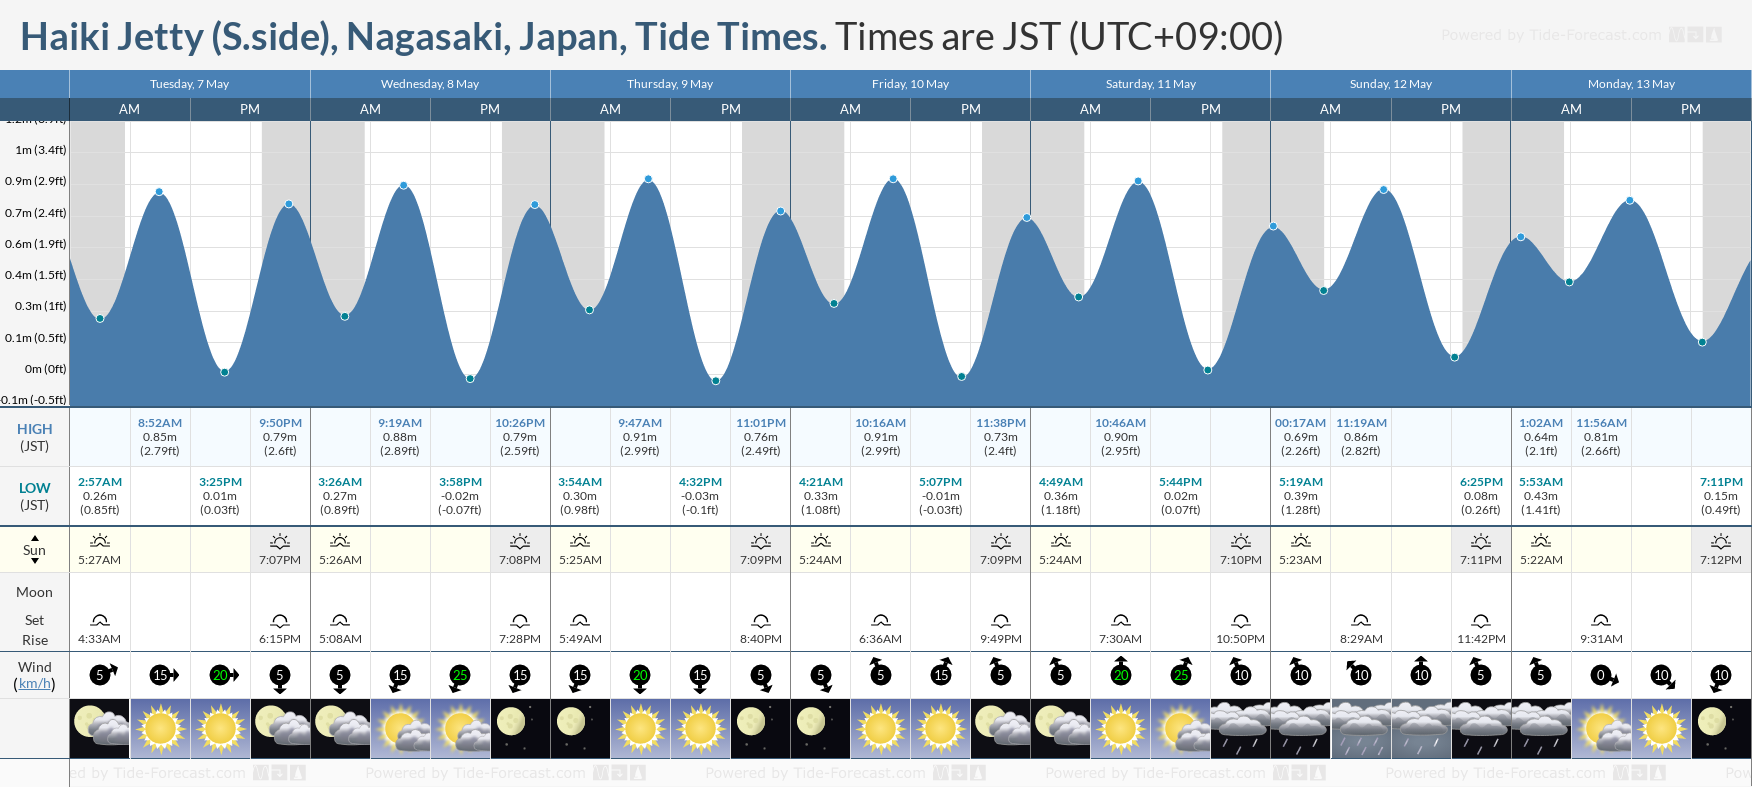 Haiki Jetty (S.side), Nagasaki, Japan Tide Chart including high and low tide tide times for the next 7 days